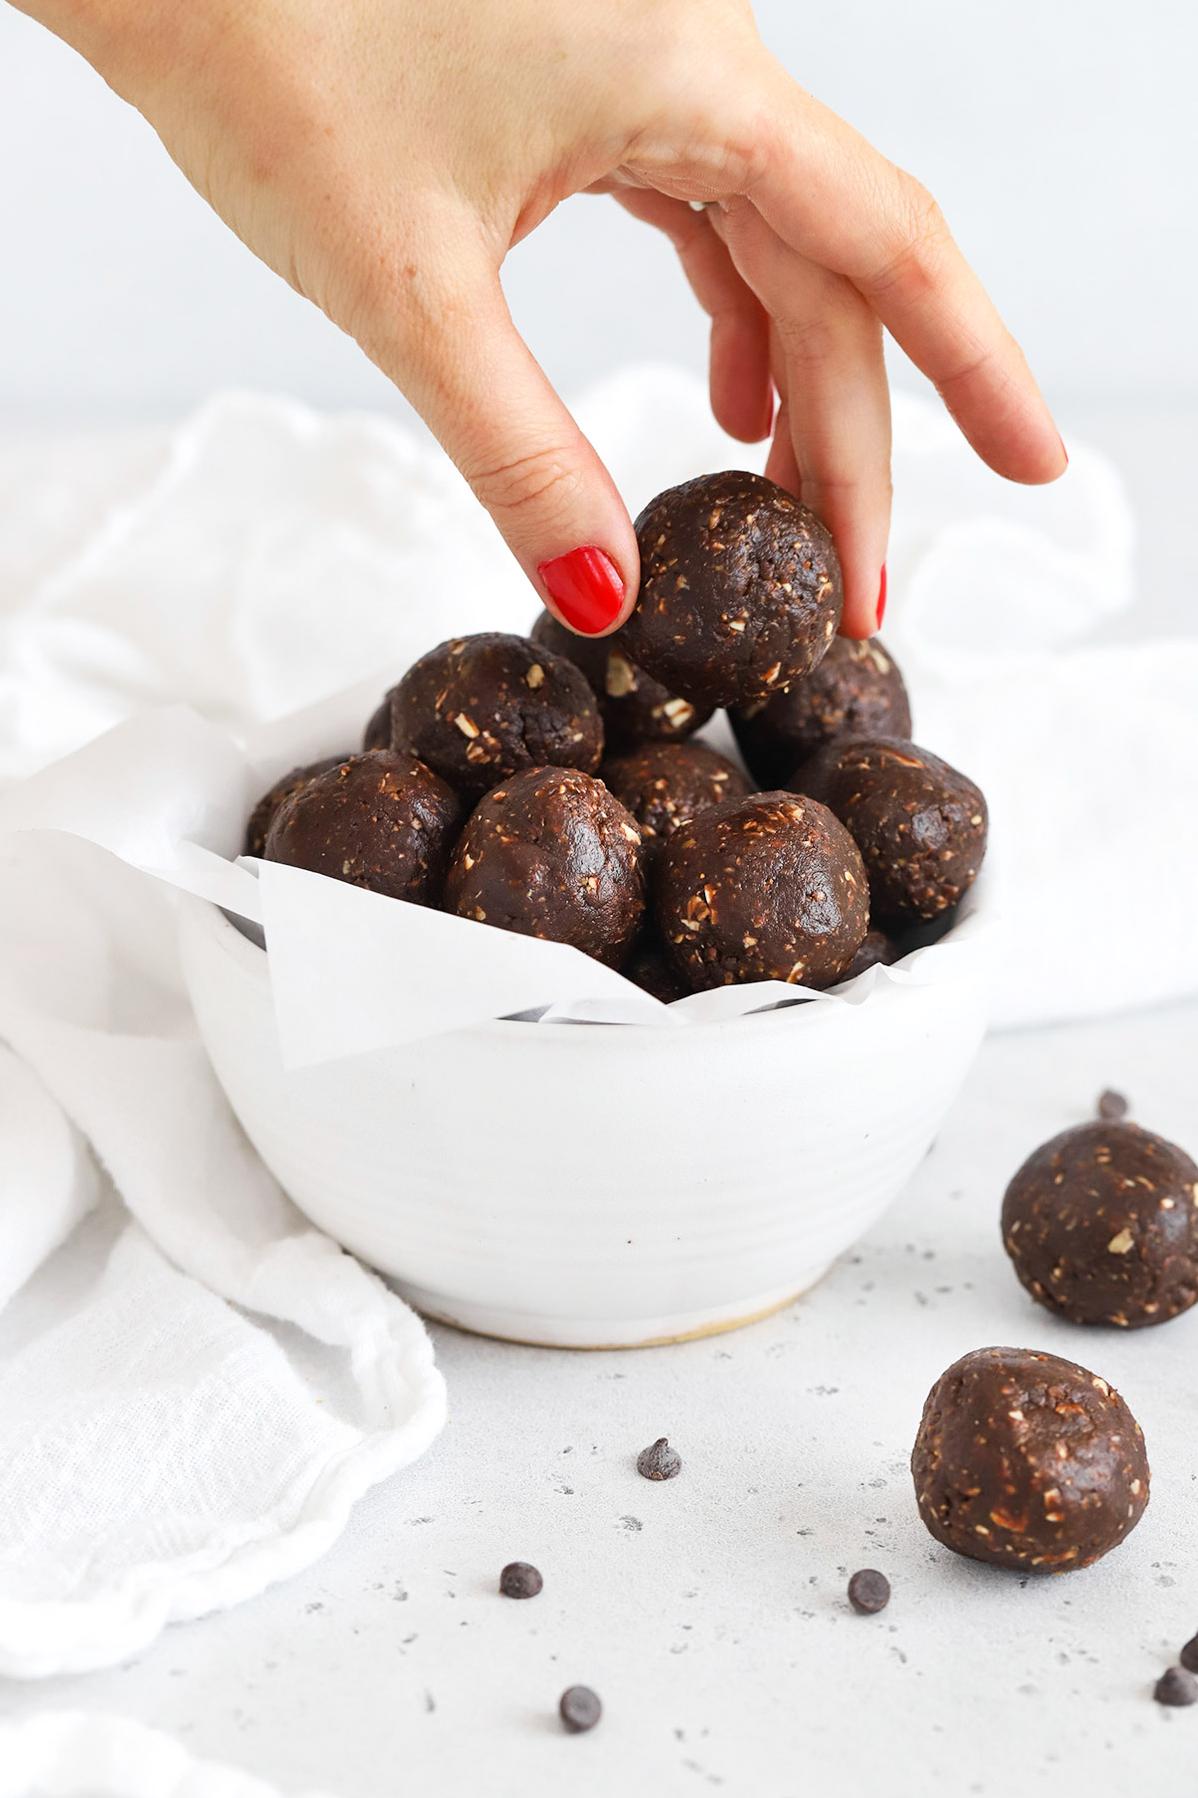  These power balls are perfect for a mid-afternoon pick-me-up.